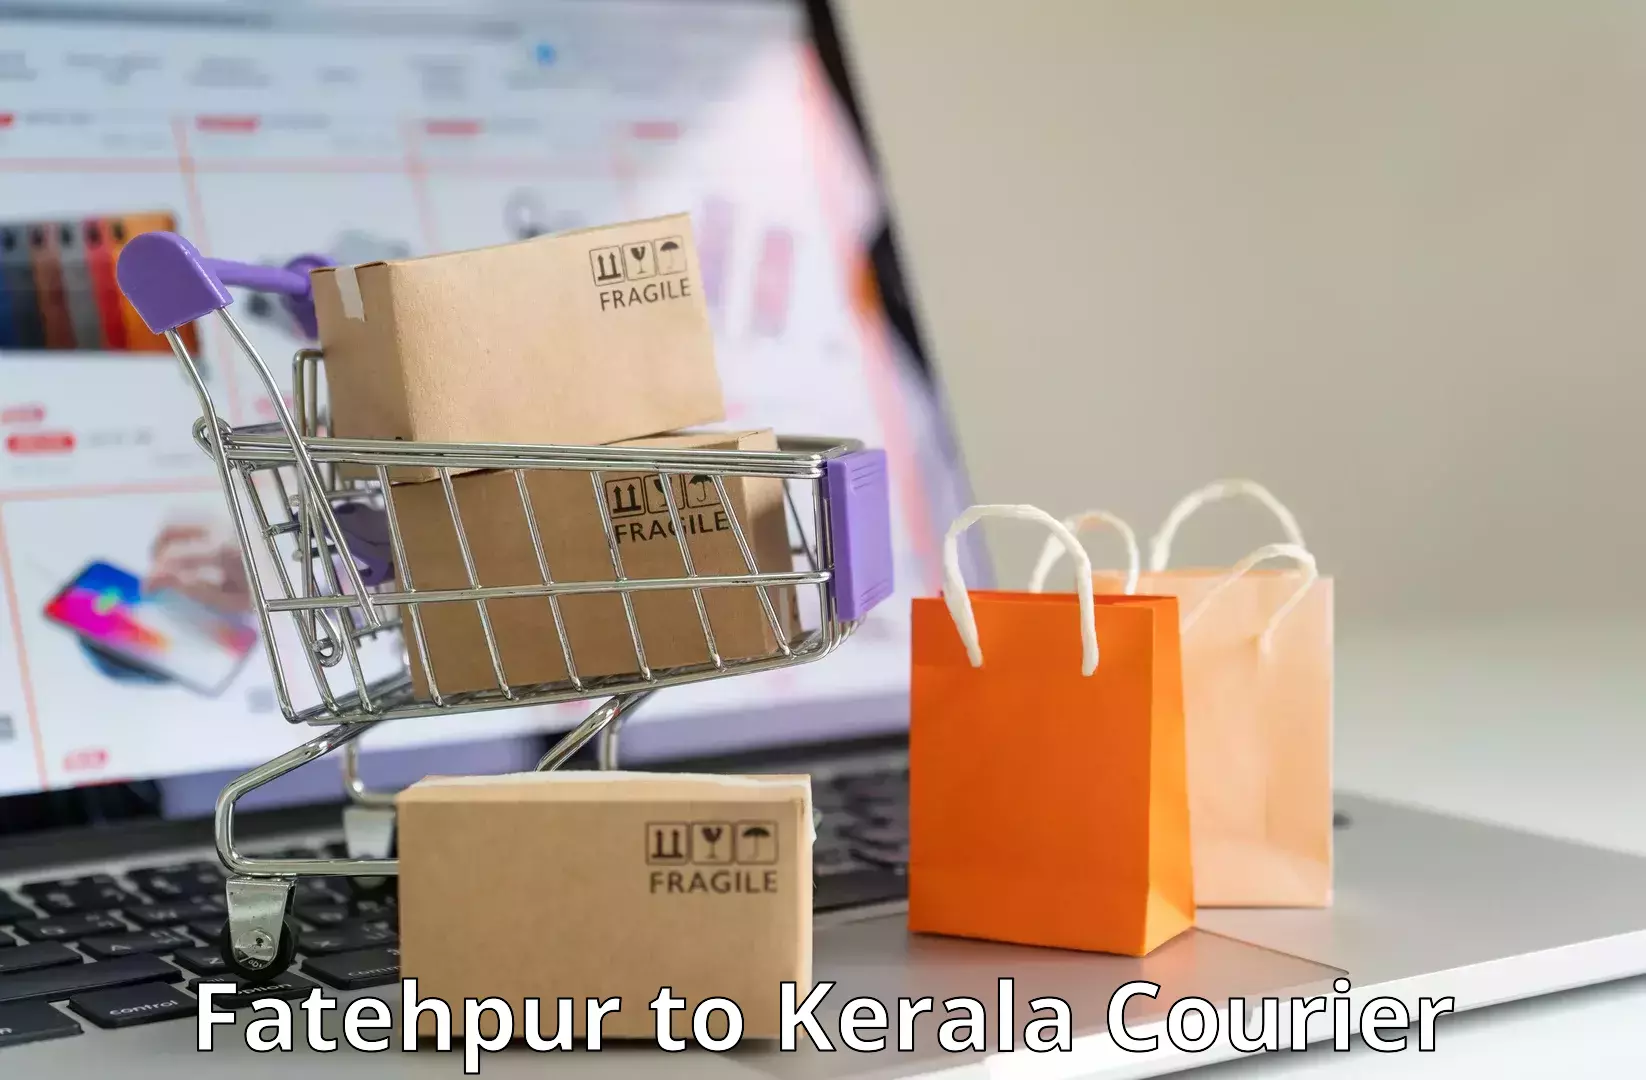 Regular parcel service Fatehpur to Cochin University of Science and Technology